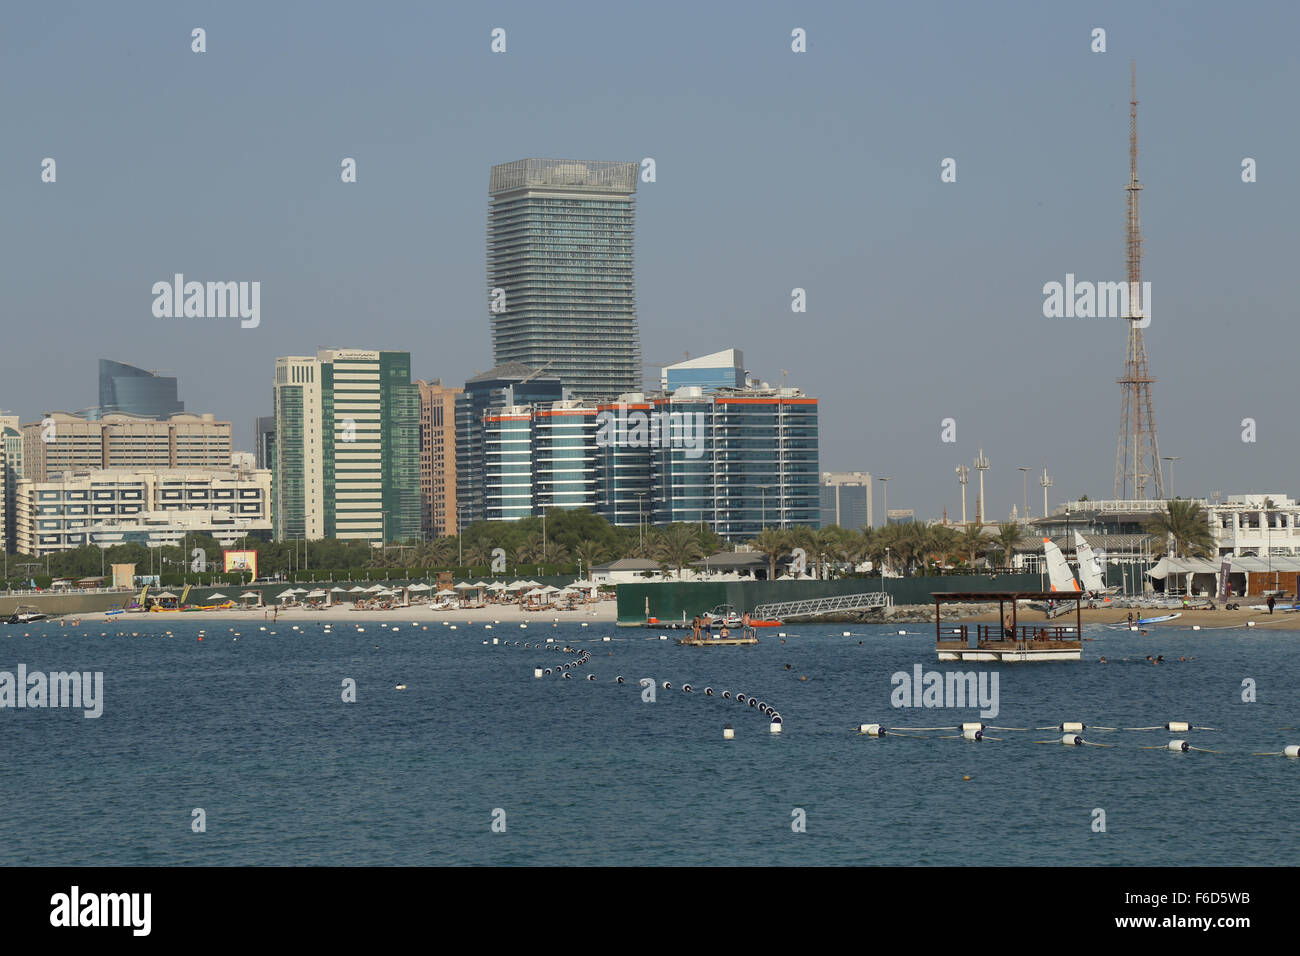 View from Cornice Abu Dhabi - Blue sea with blue sky above 